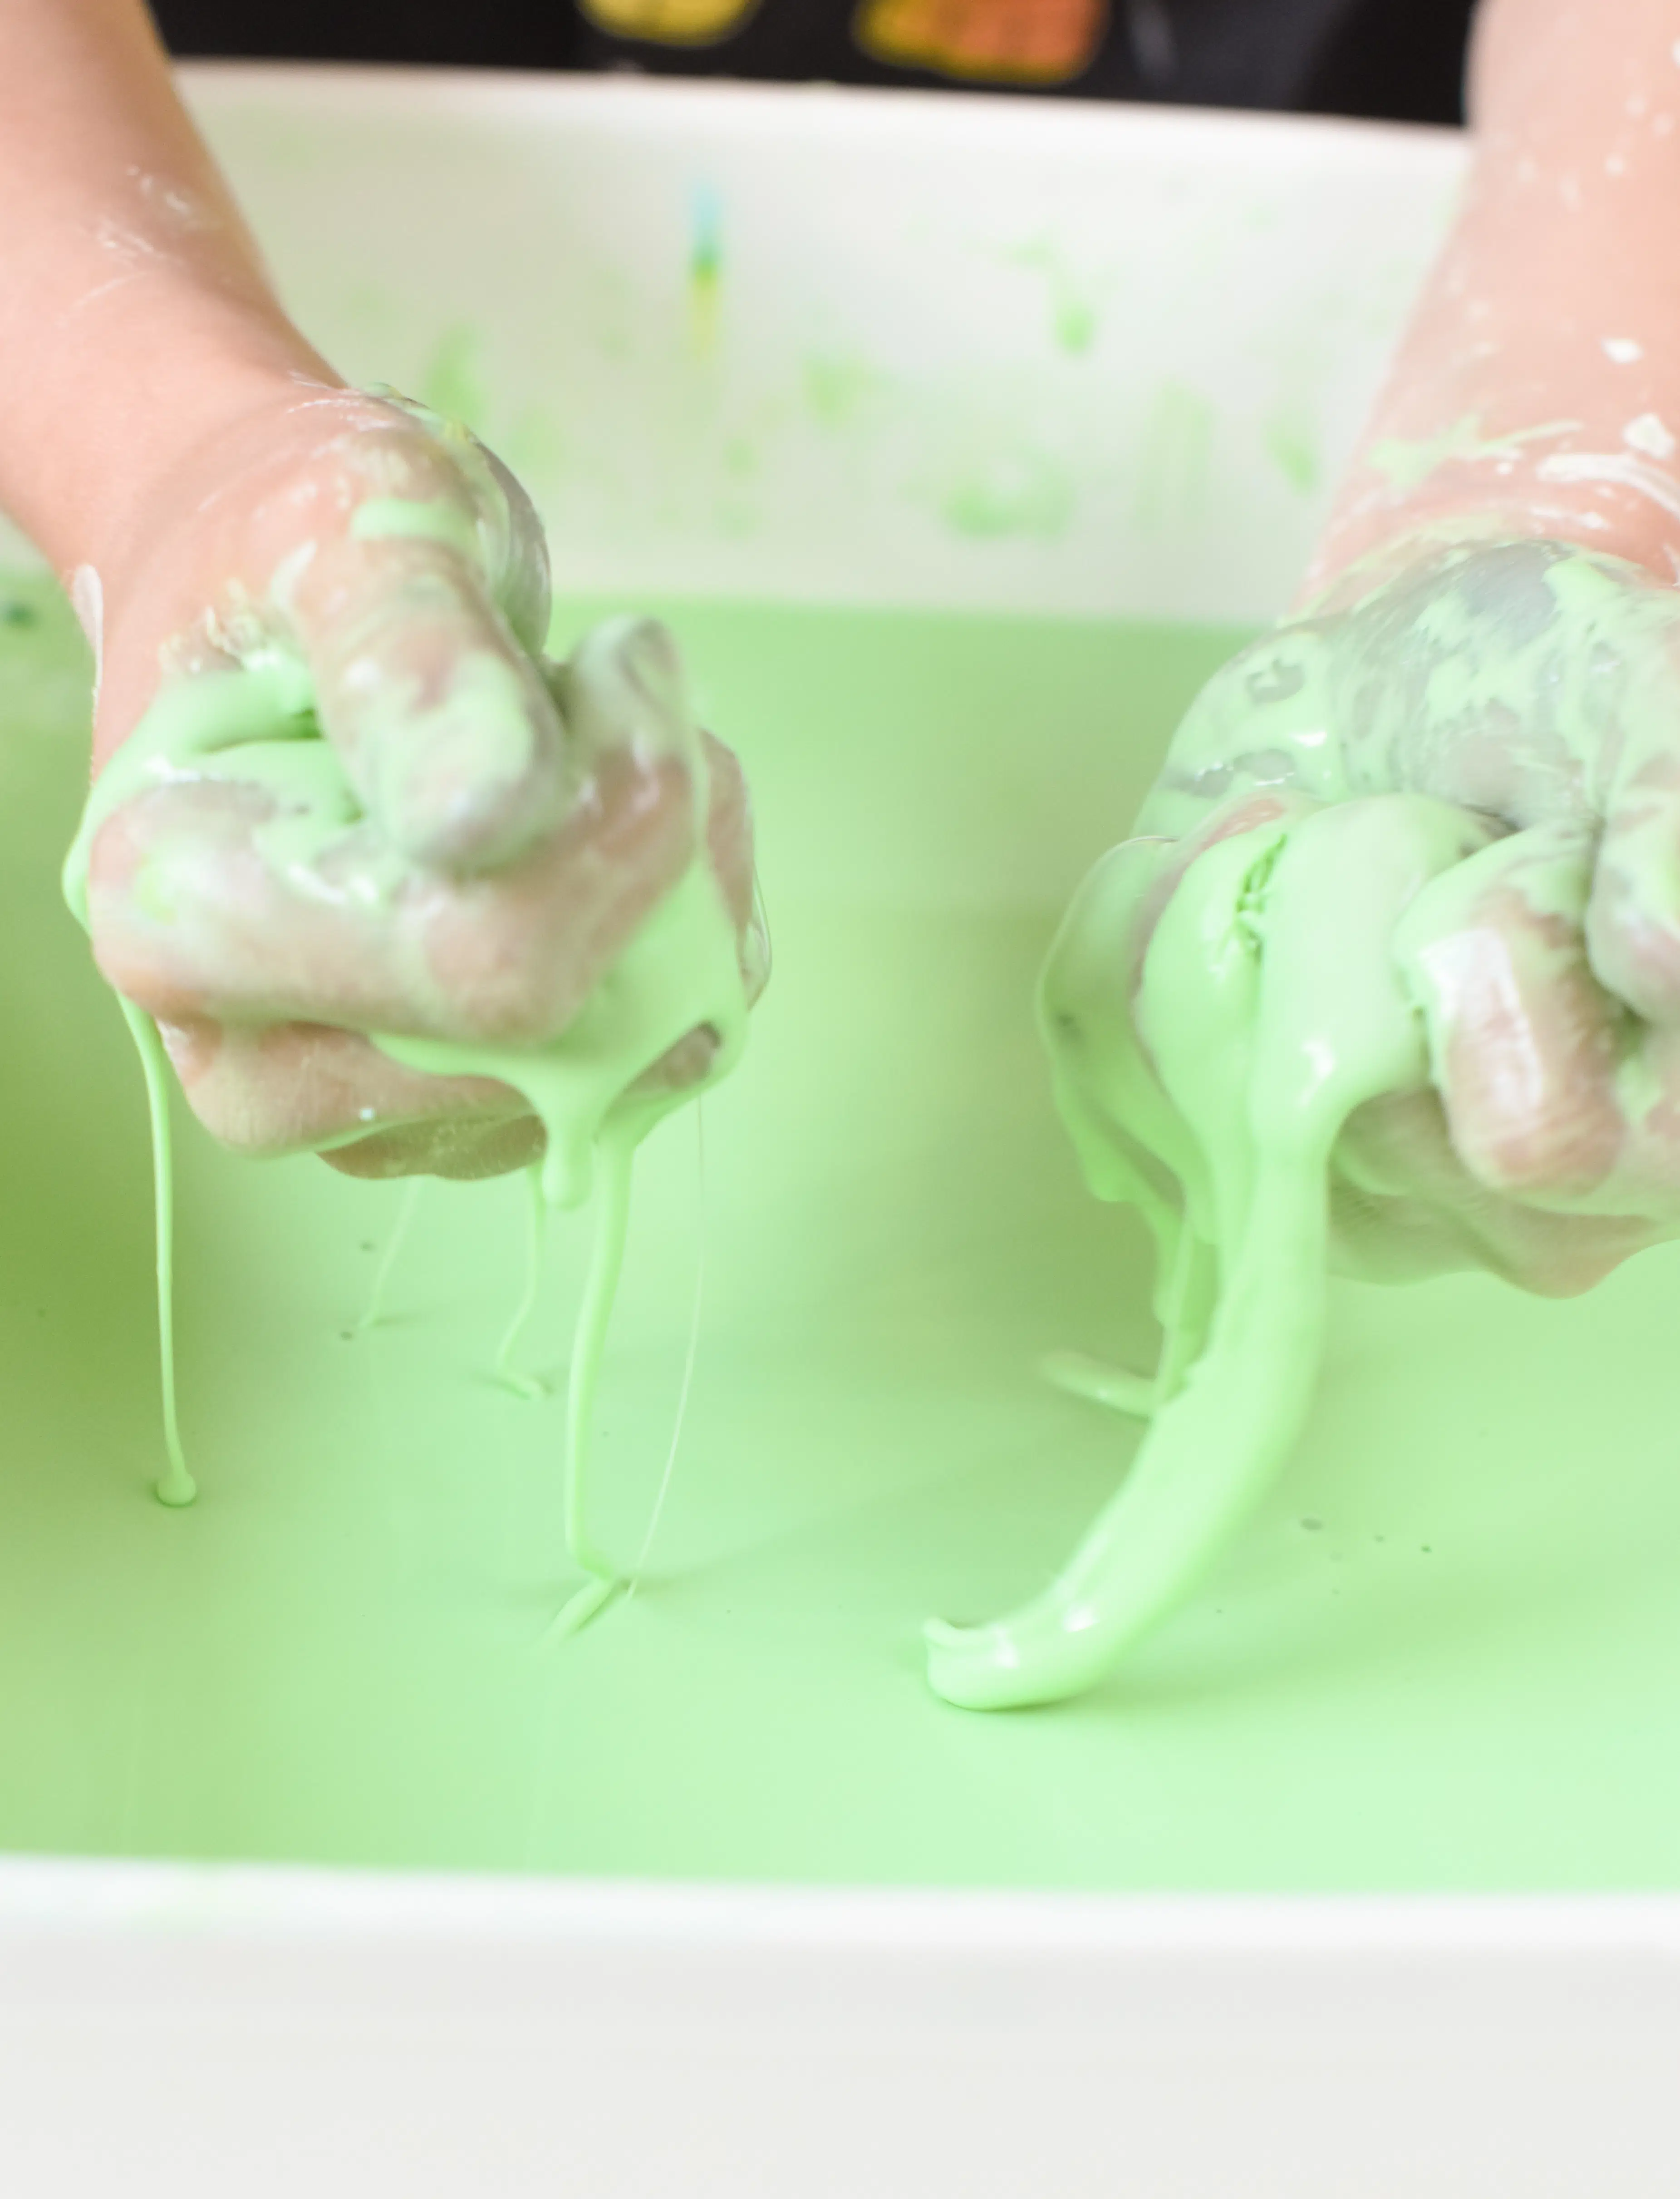 How to you make Oobleck